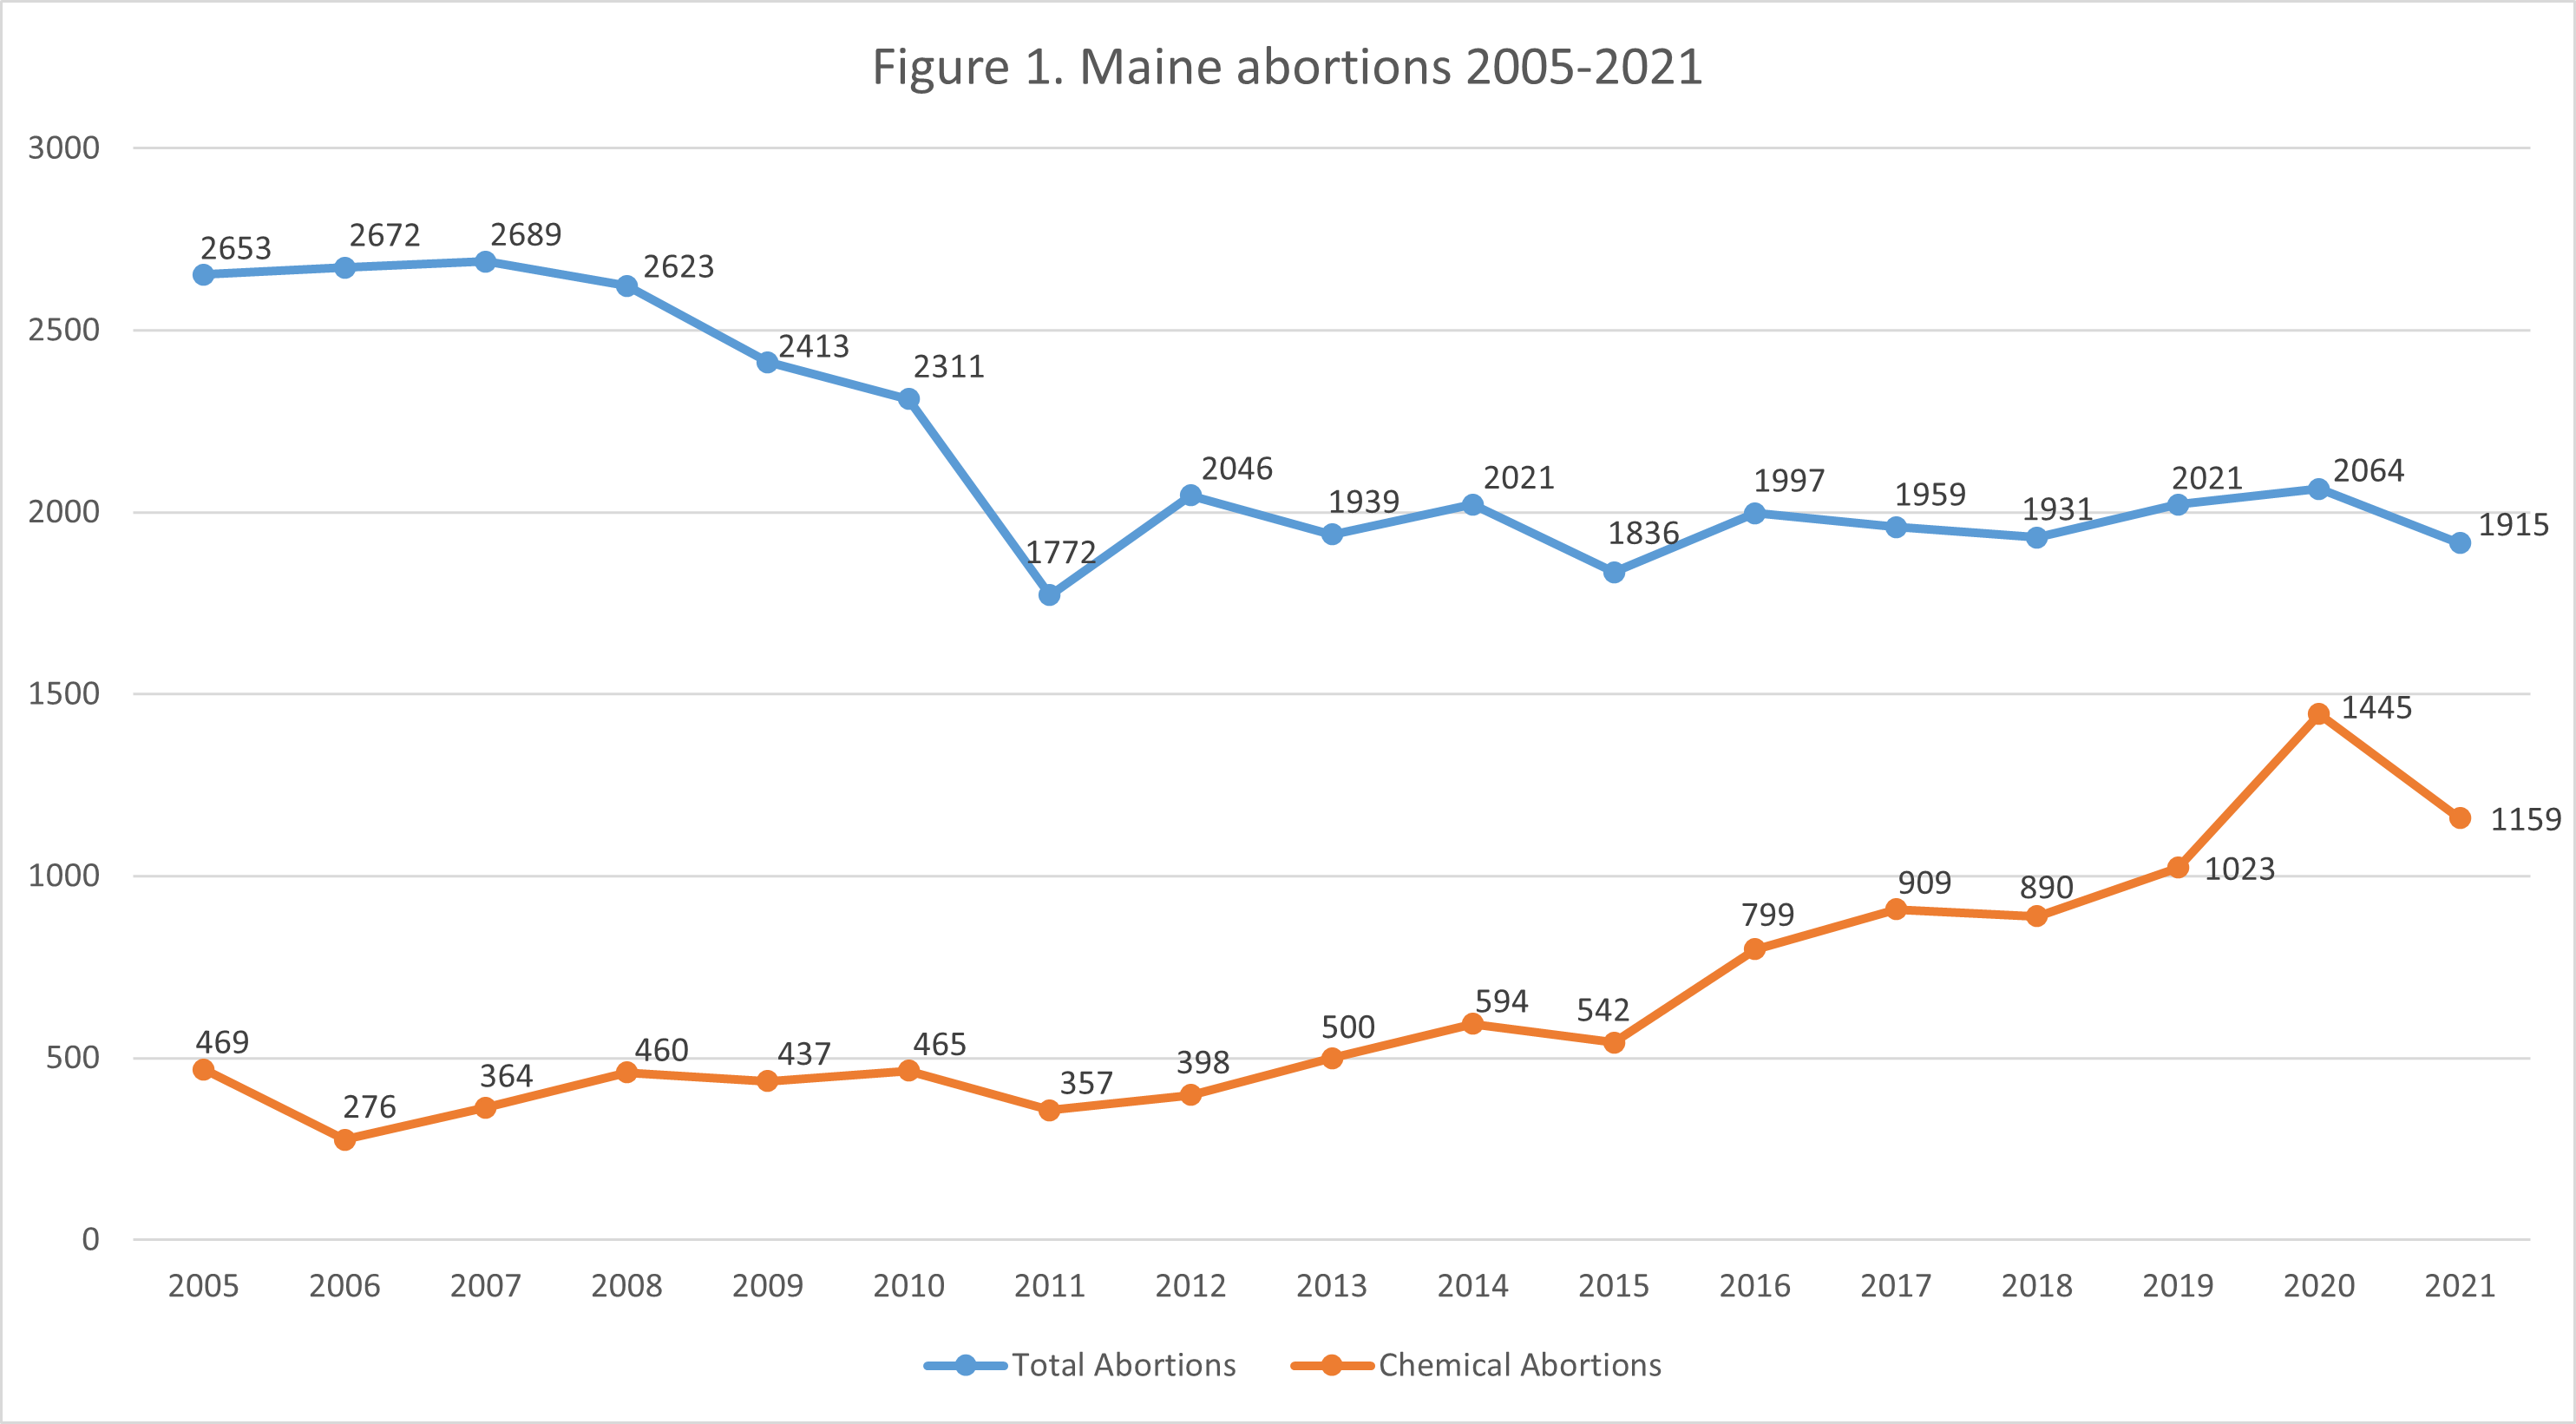 Maine Abortions Drop 7.2% as More Babies are Saved